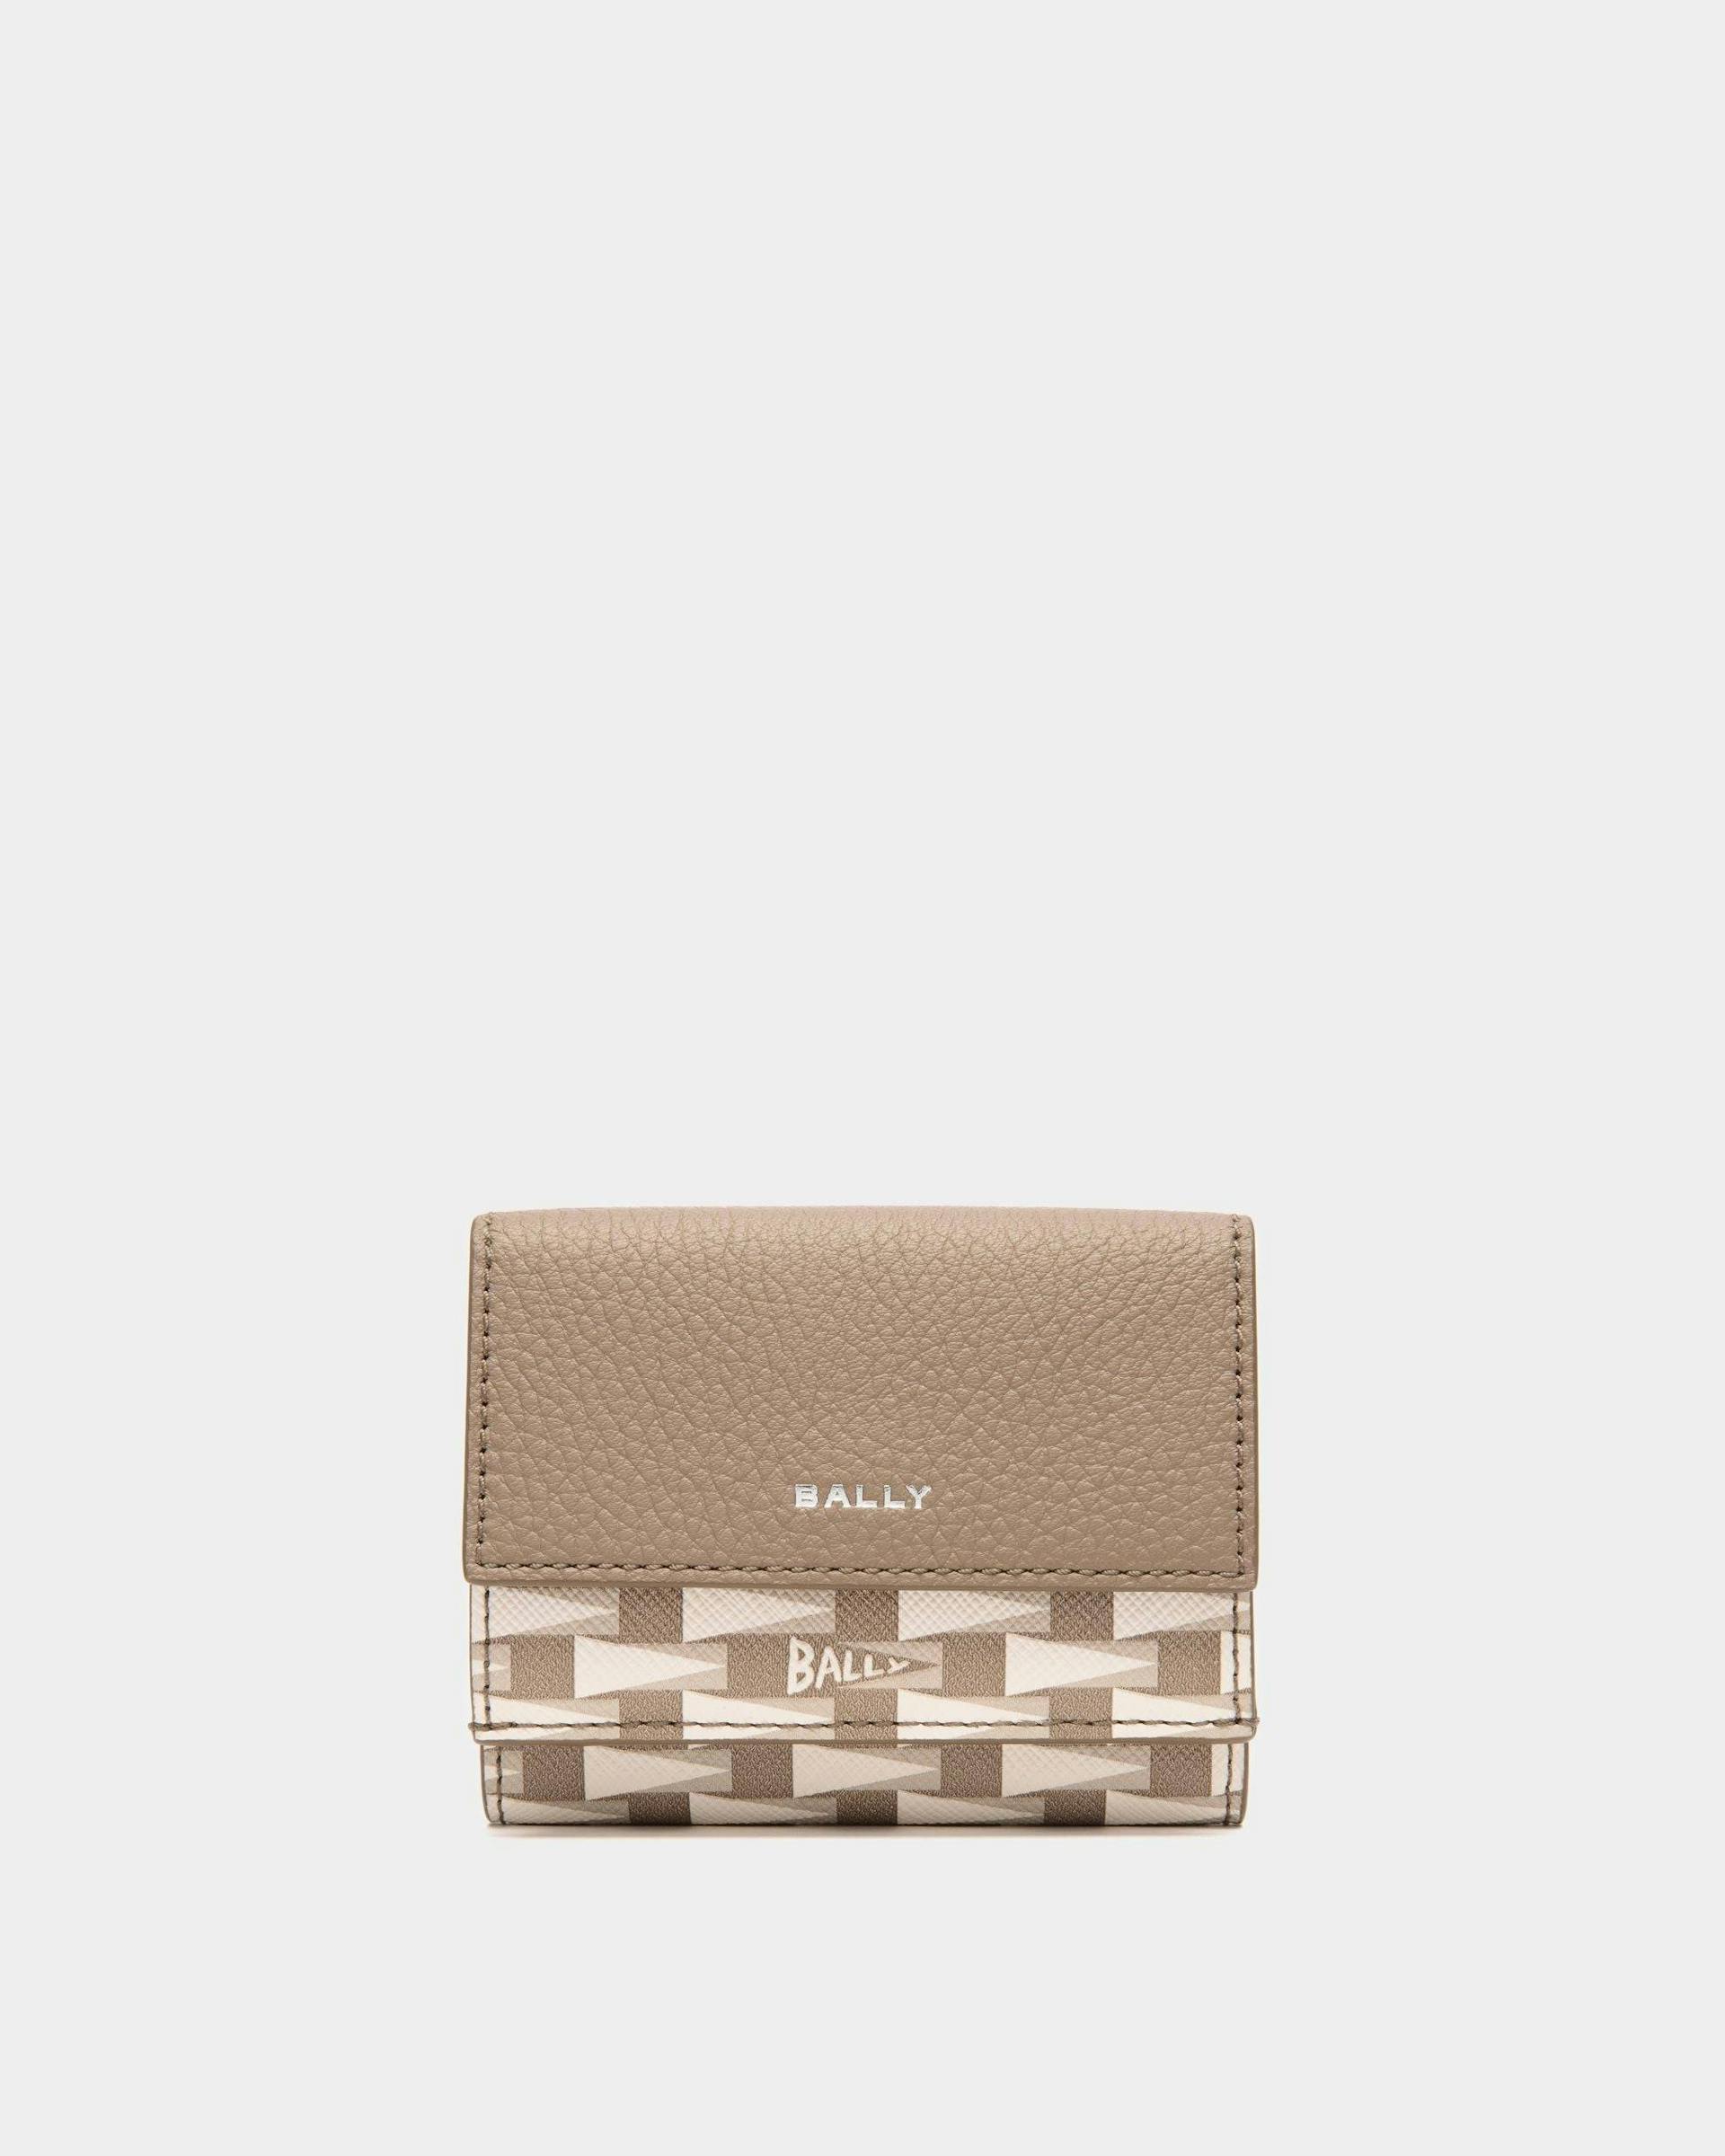 Men's Pennant Trifold Wallet in TPU | Bally | Still Life Front